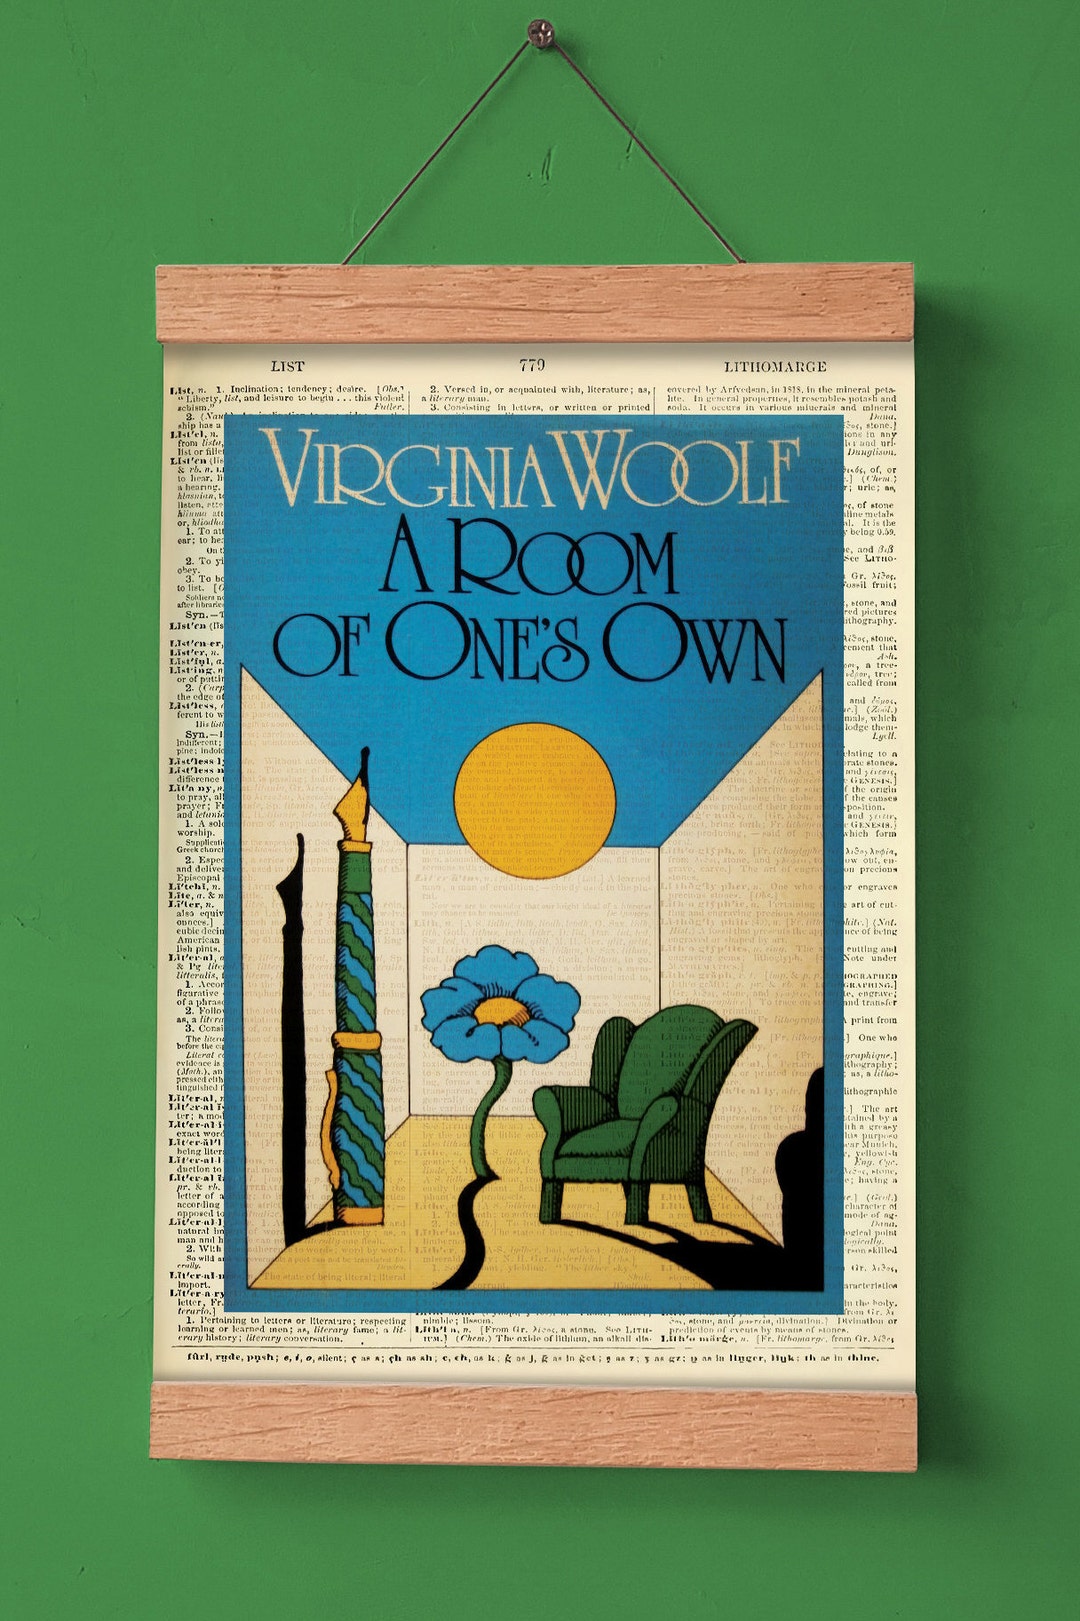 printable-book-cover-a-room-of-one-s-own-by-virginia-woolf-literary-poster-wall-decor-book